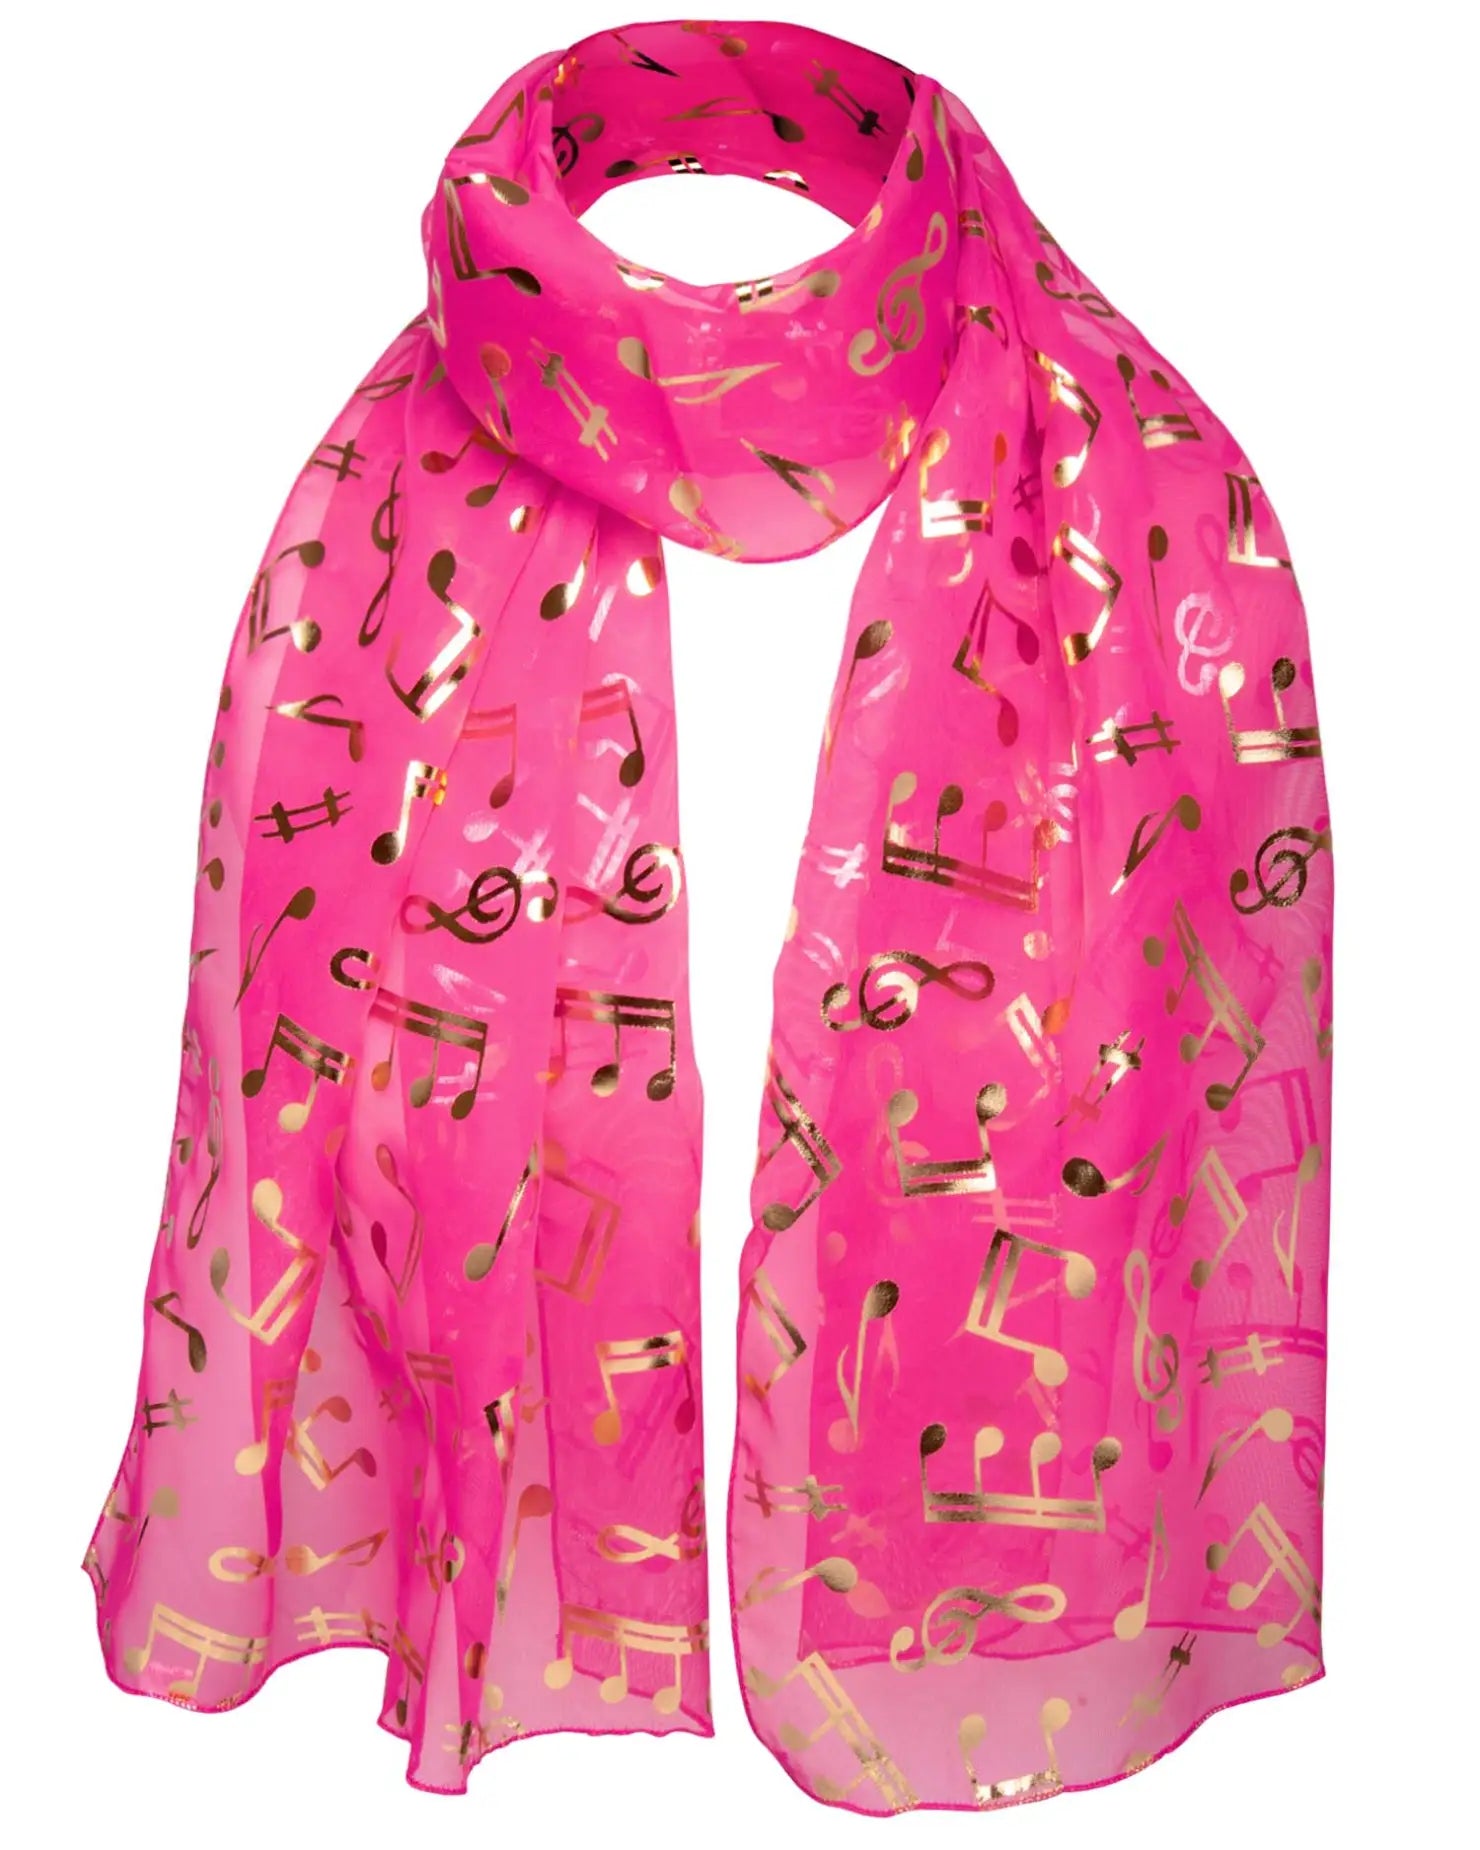 Pink chiffon scarf with gold foil music notes design